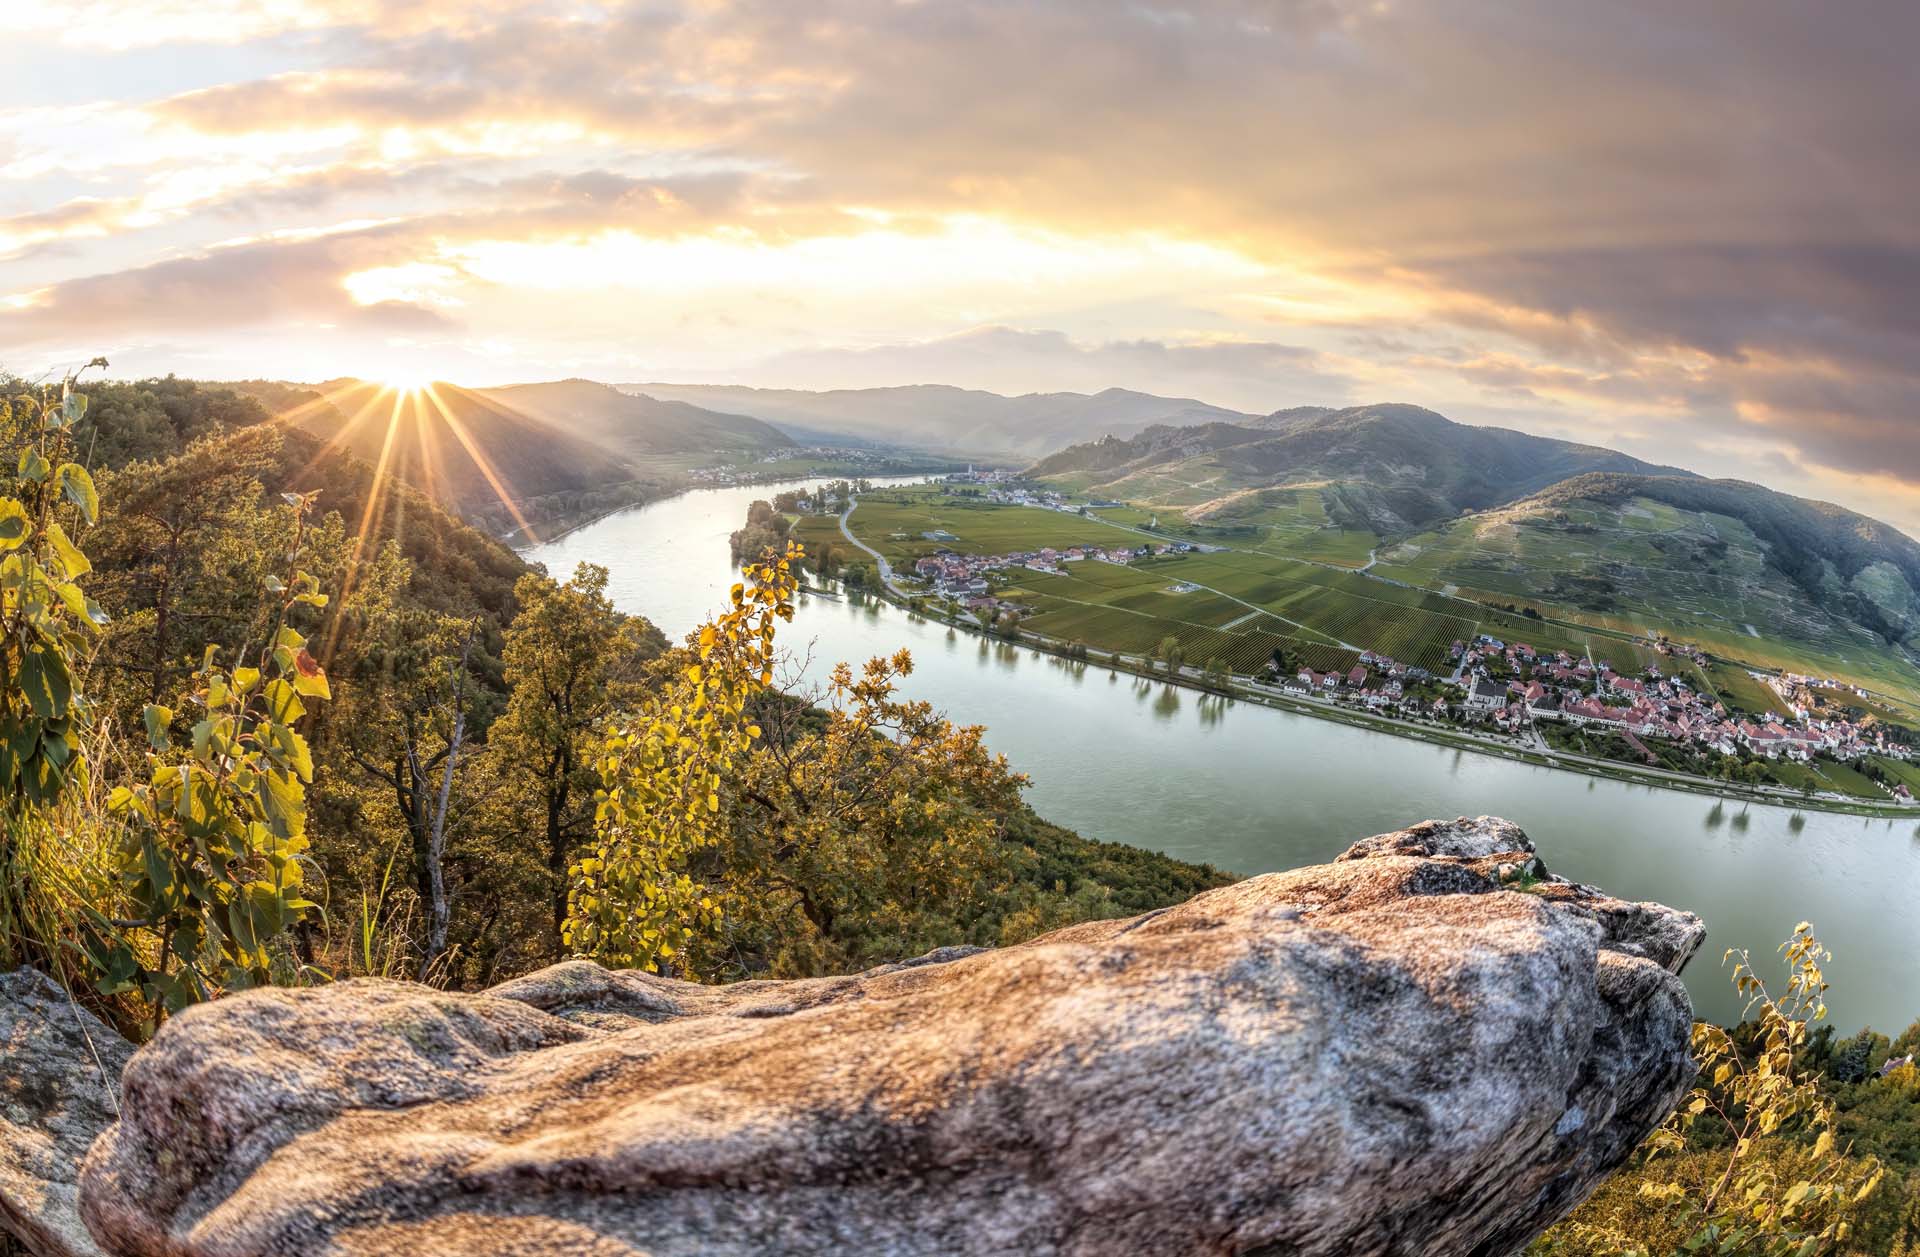 A view over the Wachau valley on the Danube